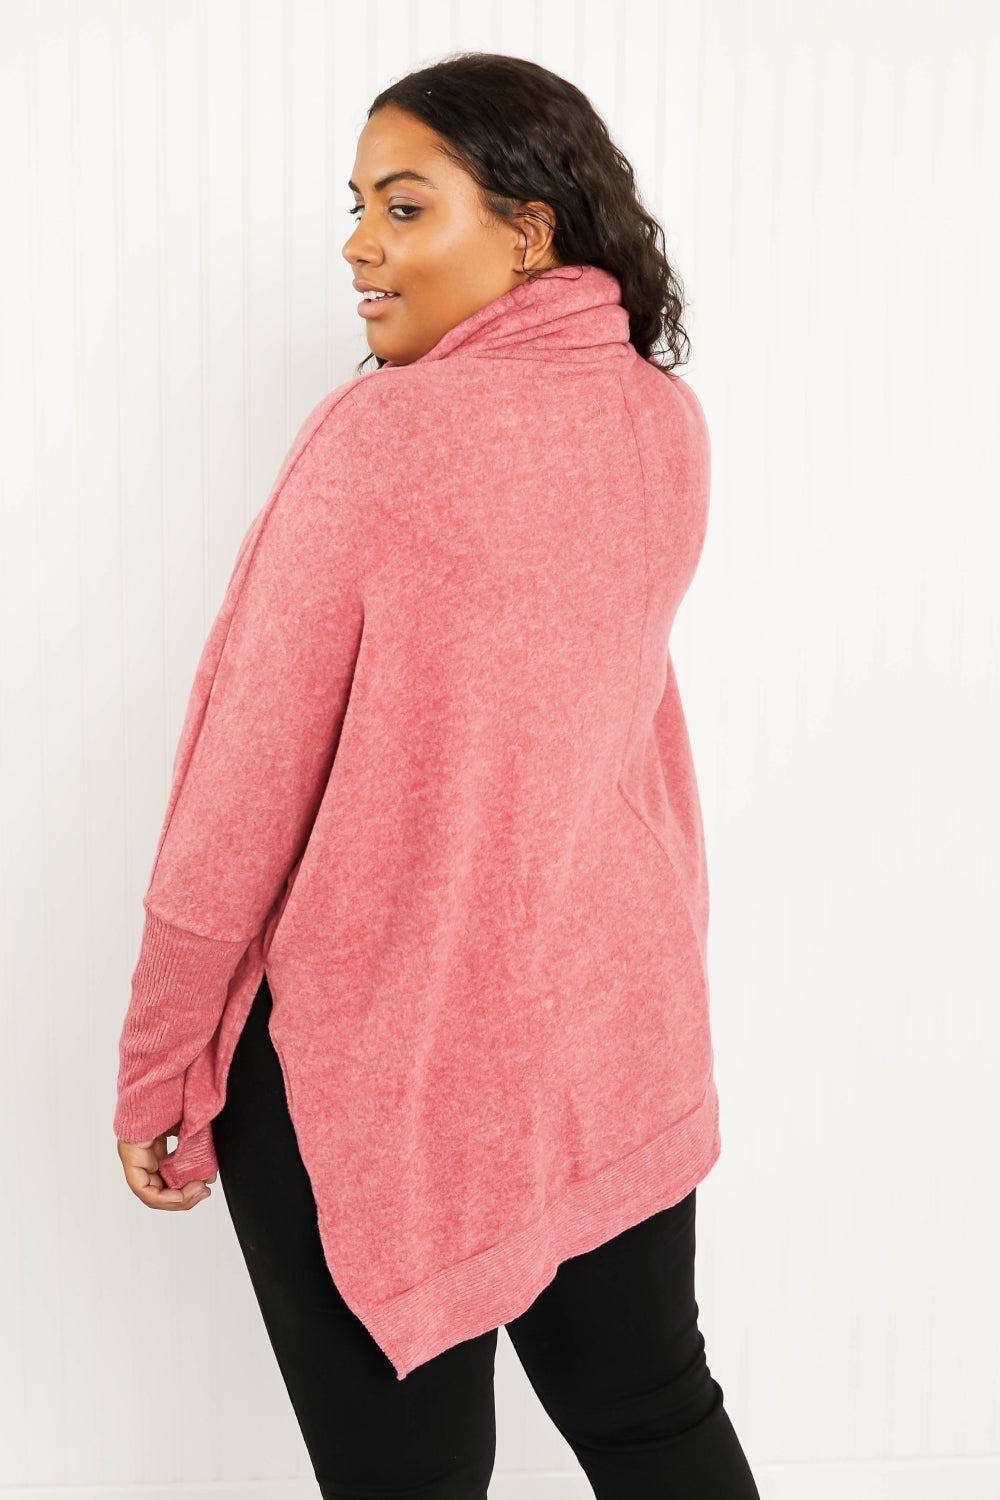 Love and Cuddles Cowl Neck Poncho Sweater